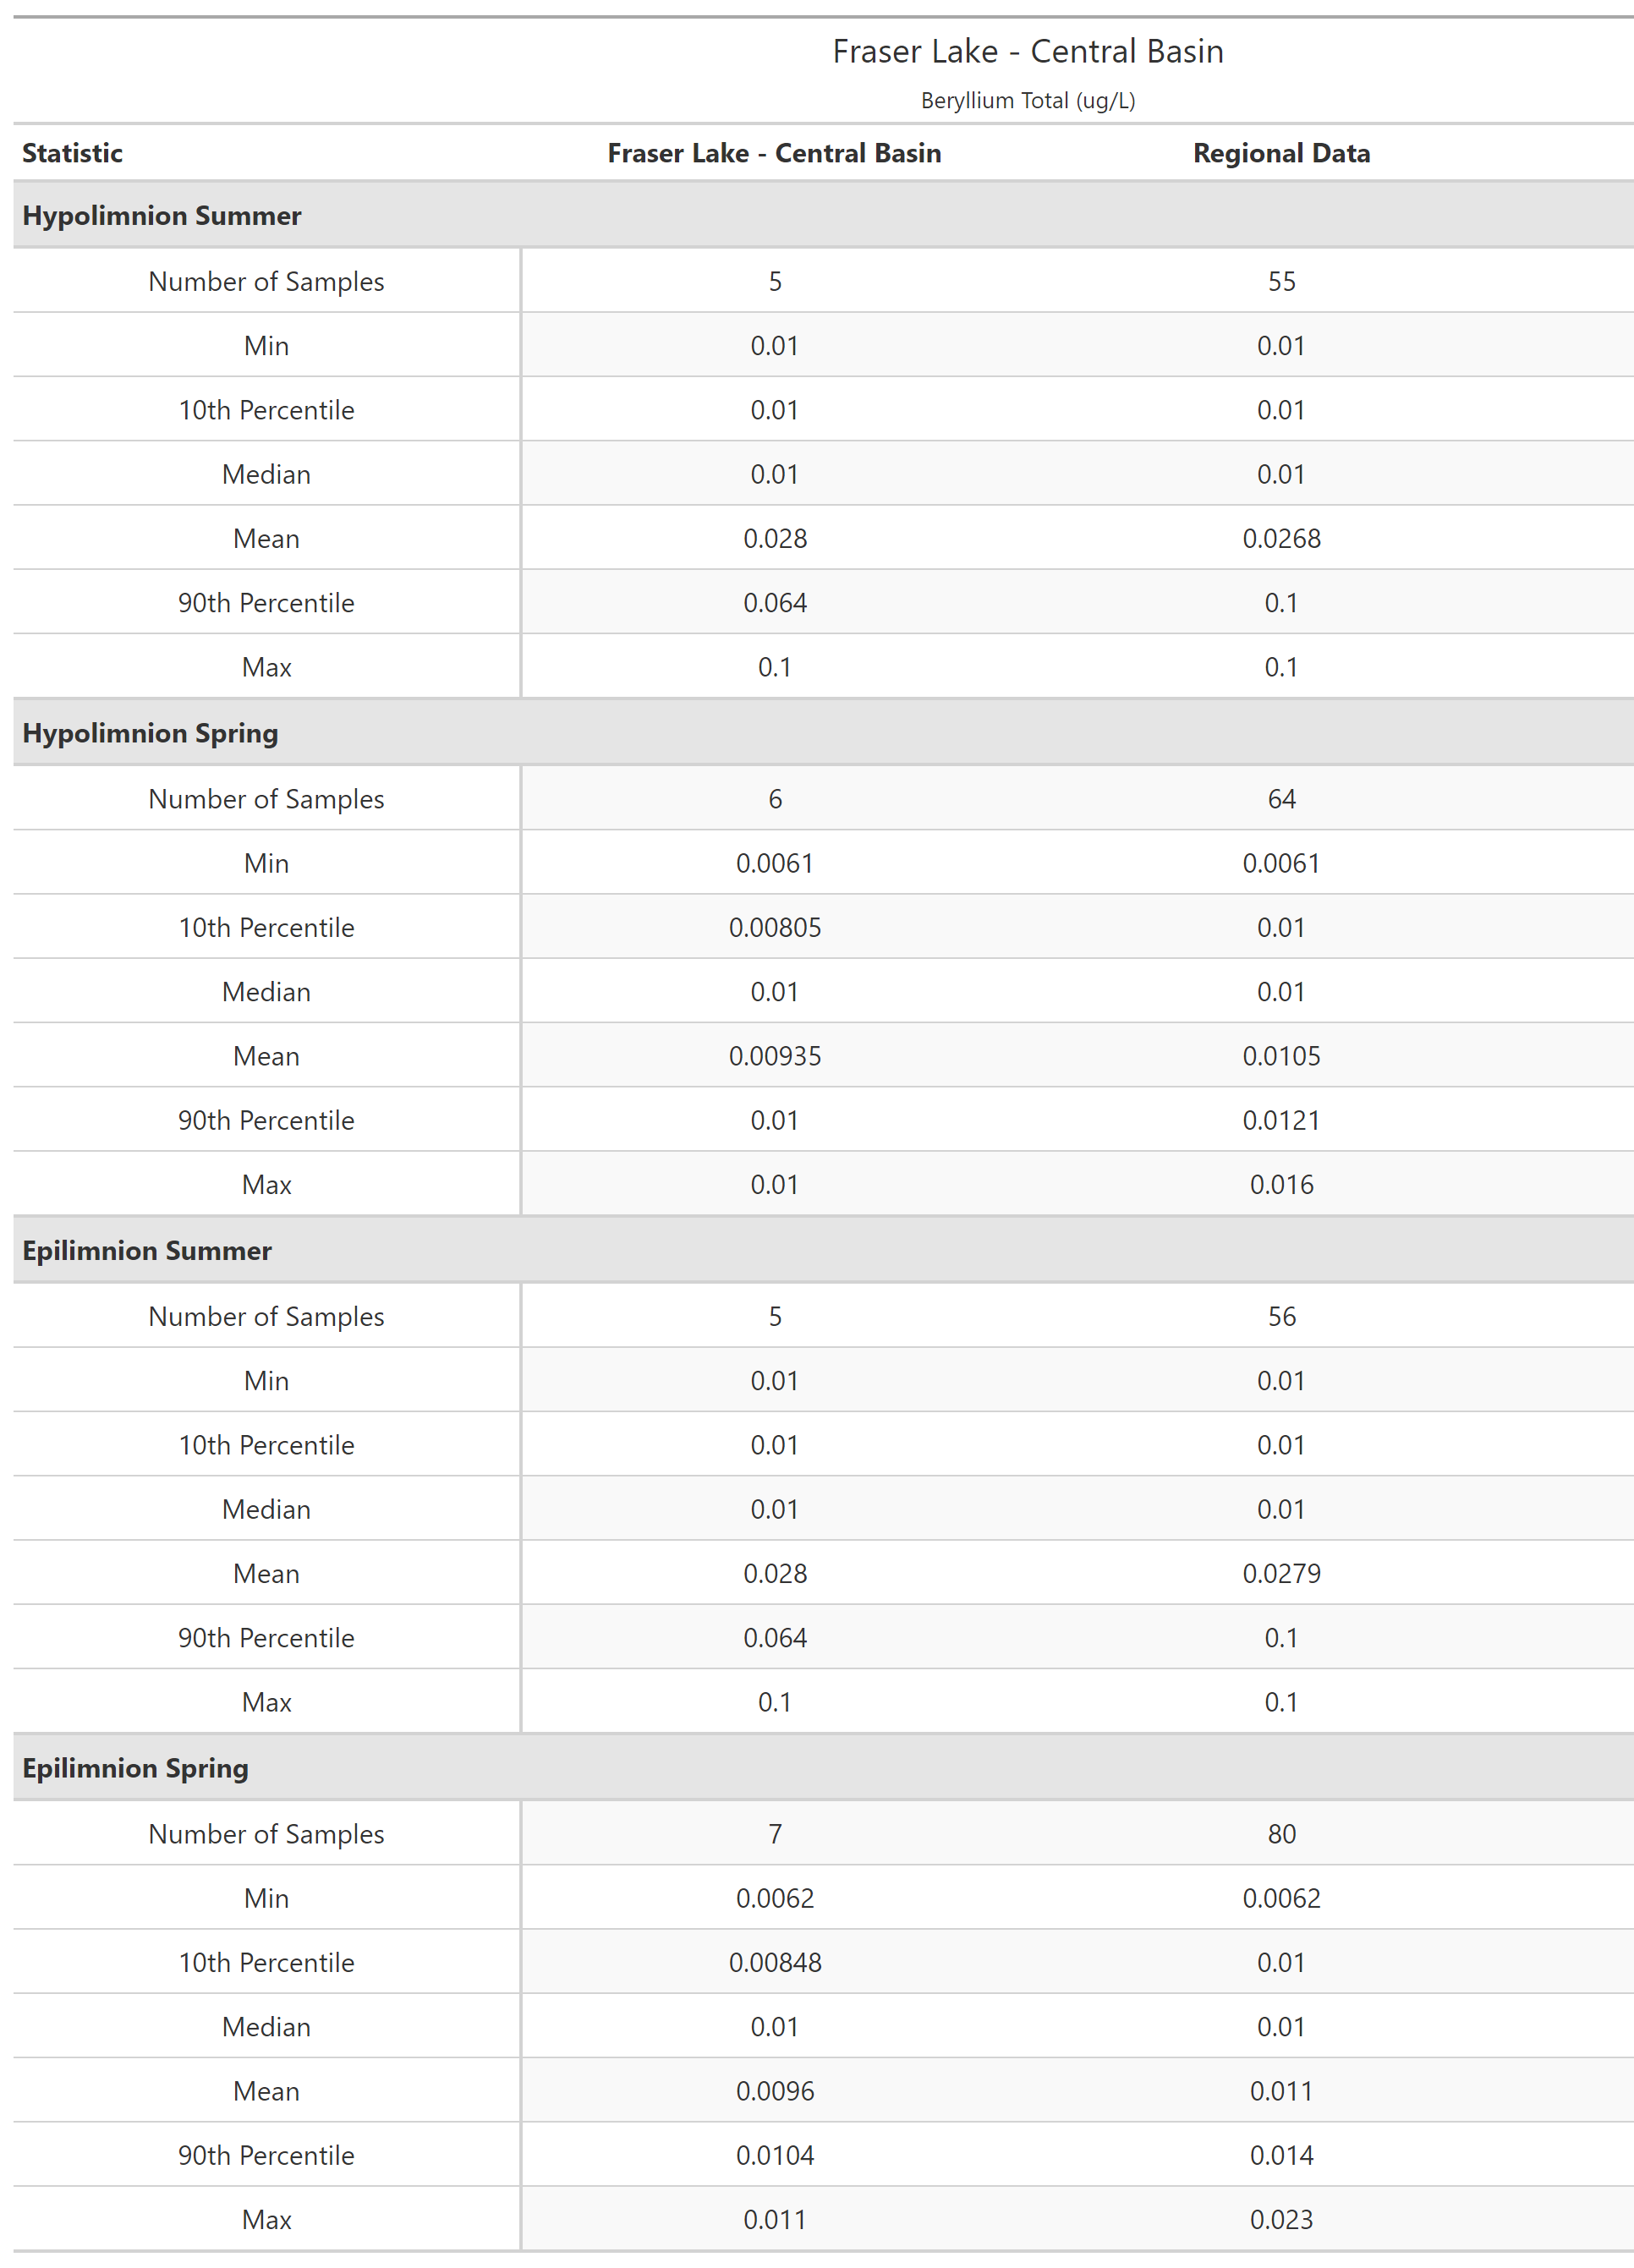 A table of summary statistics for Beryllium Total with comparison to regional data